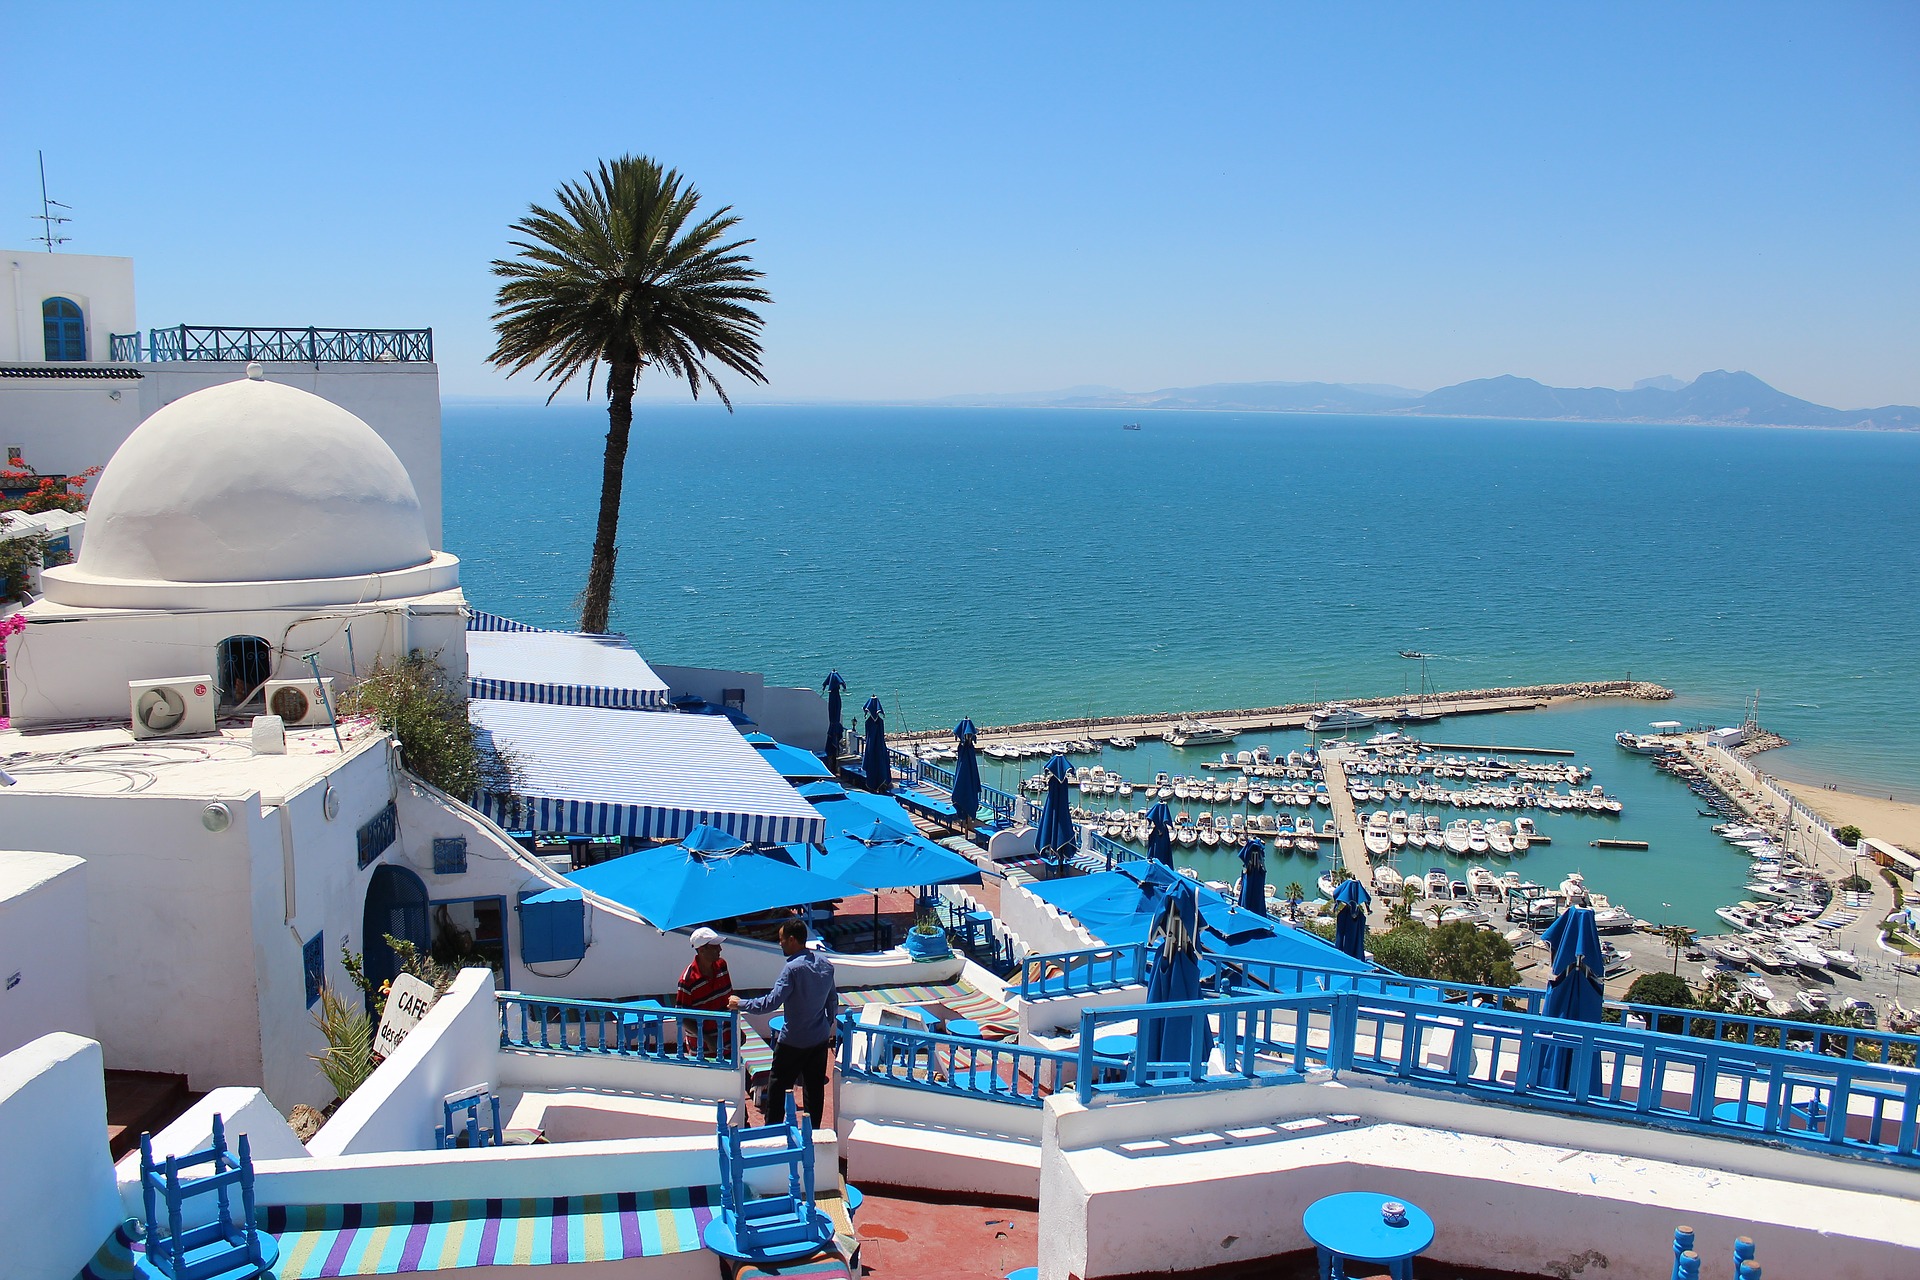 <p>Tunisia is another destination we propose if you want a low-cost vacation. There are remains to visit from pre-colonial and colonial settlements as well as magnificent Mediterranean beaches and the film locations of 'Star Wars'.</p>